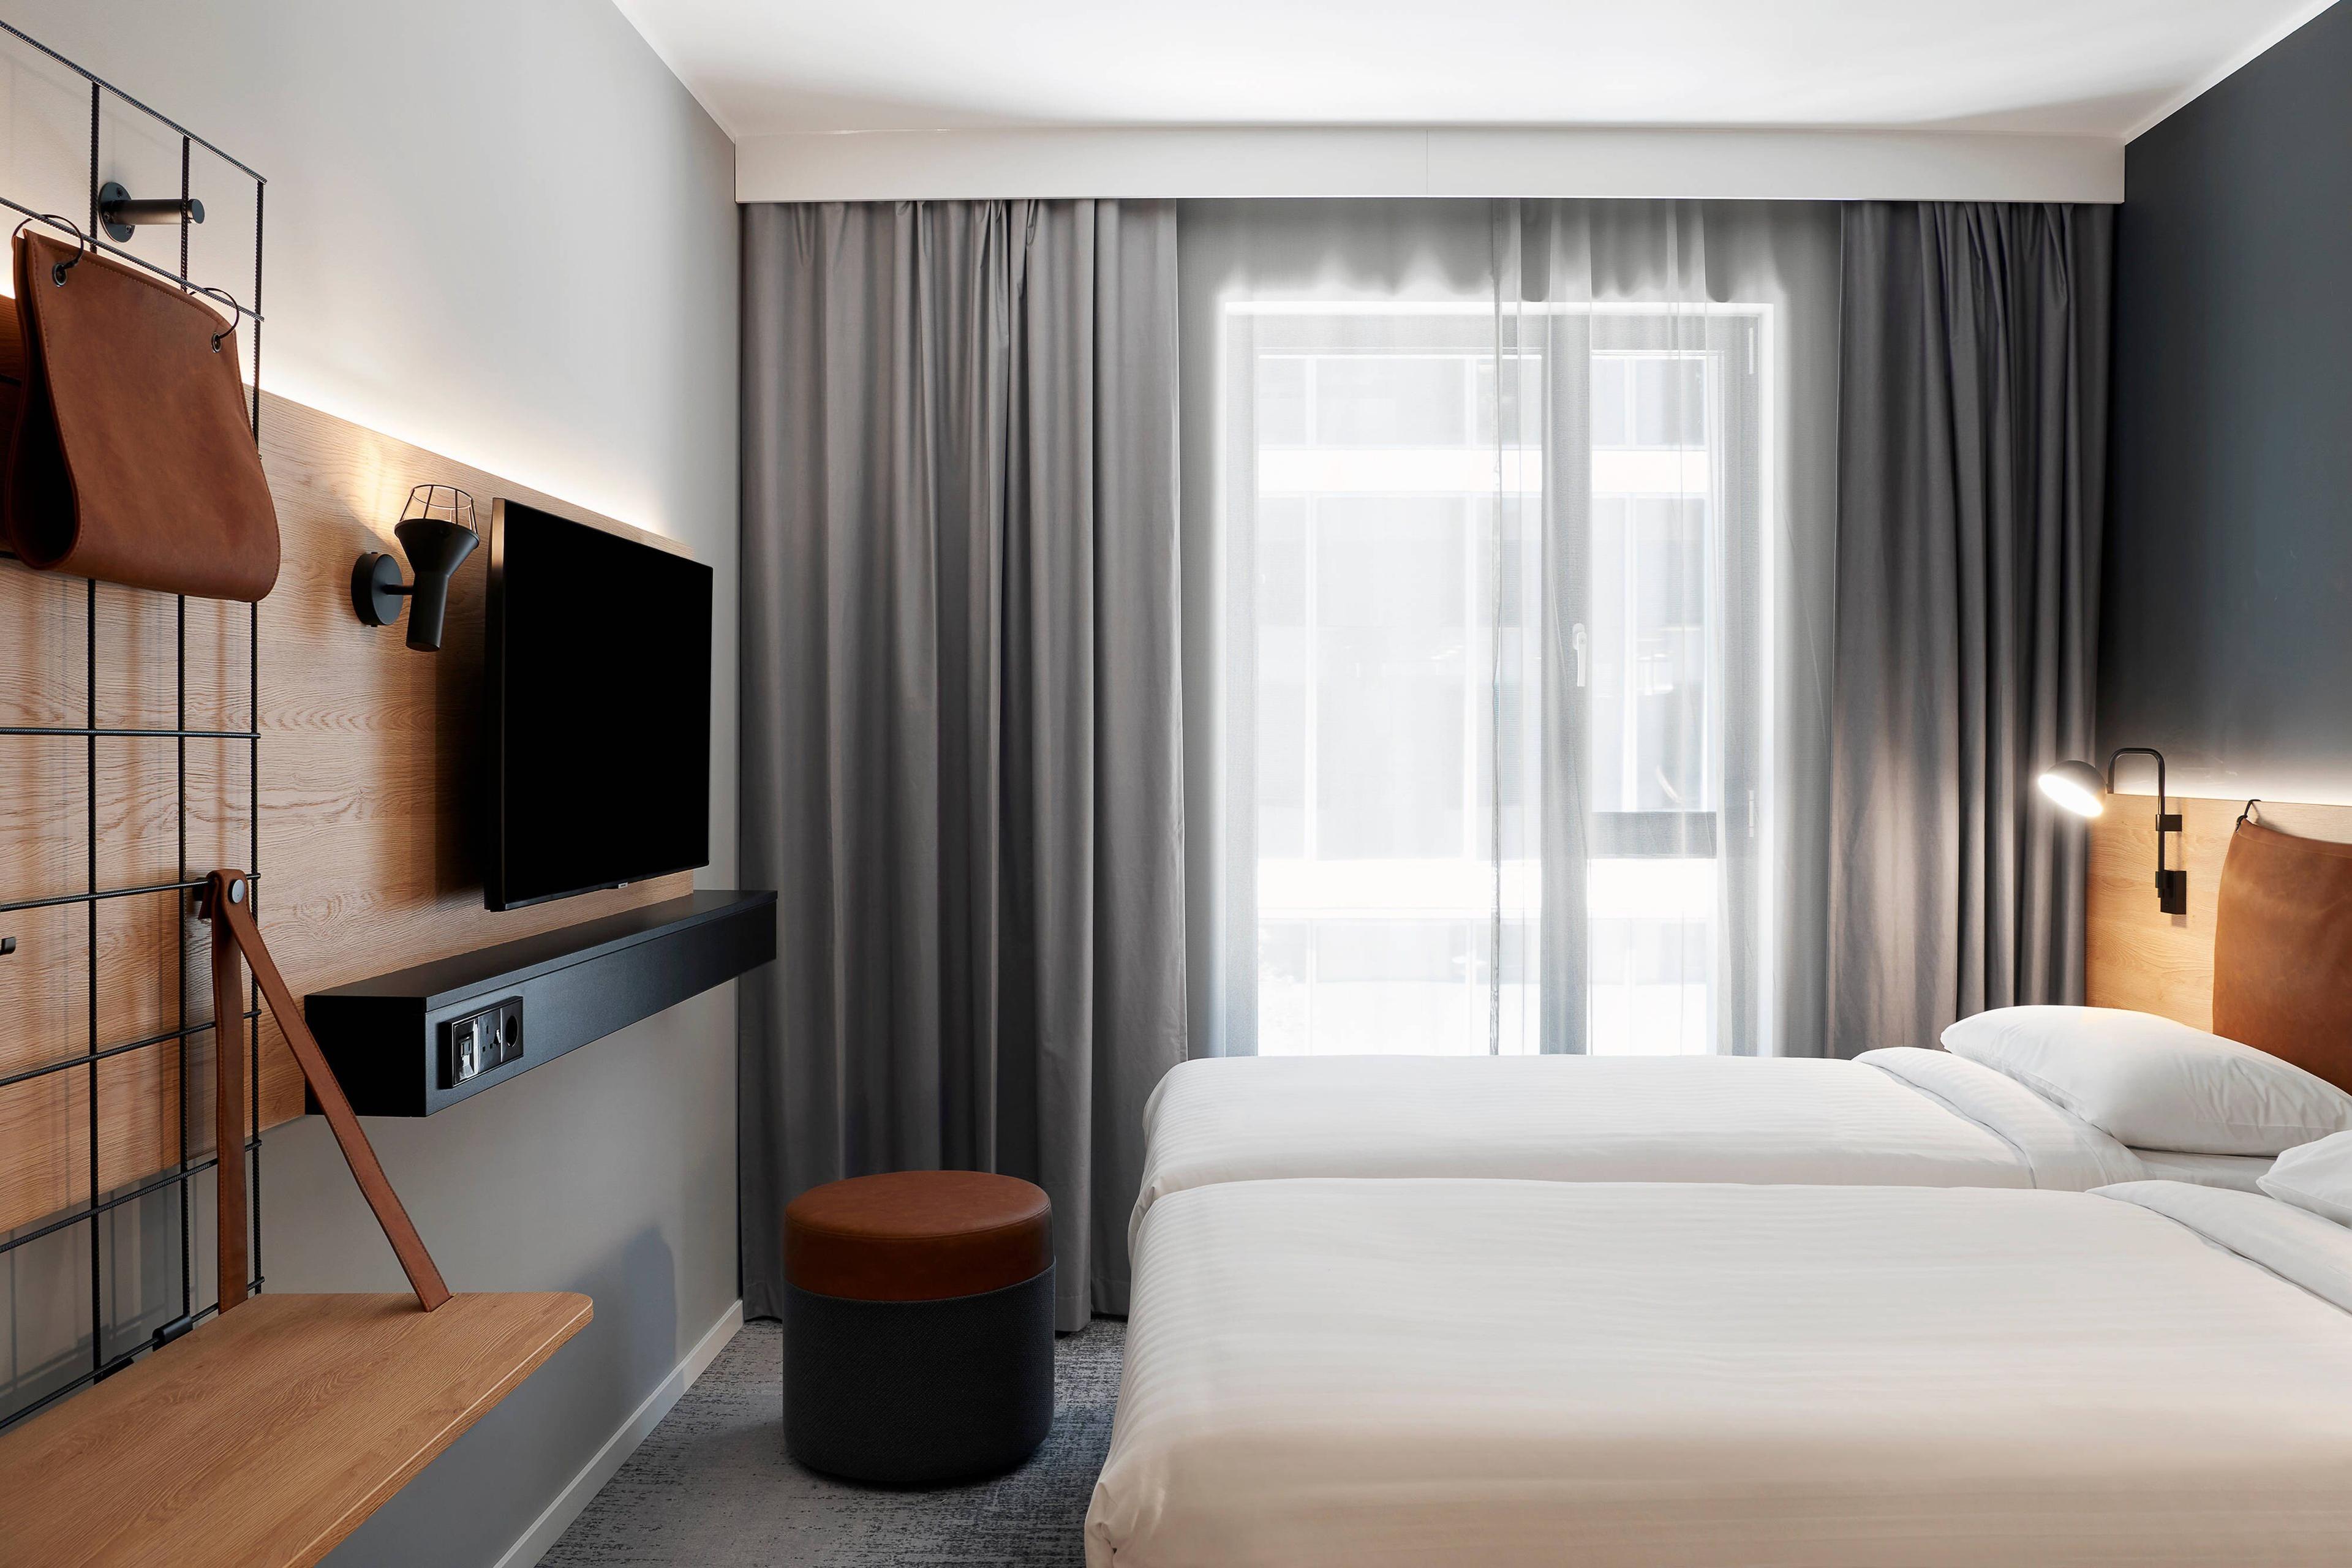 Two beds, twice the fun! - at Moxy, we always say, it's not the size of the room that matters, it’s how you use it!